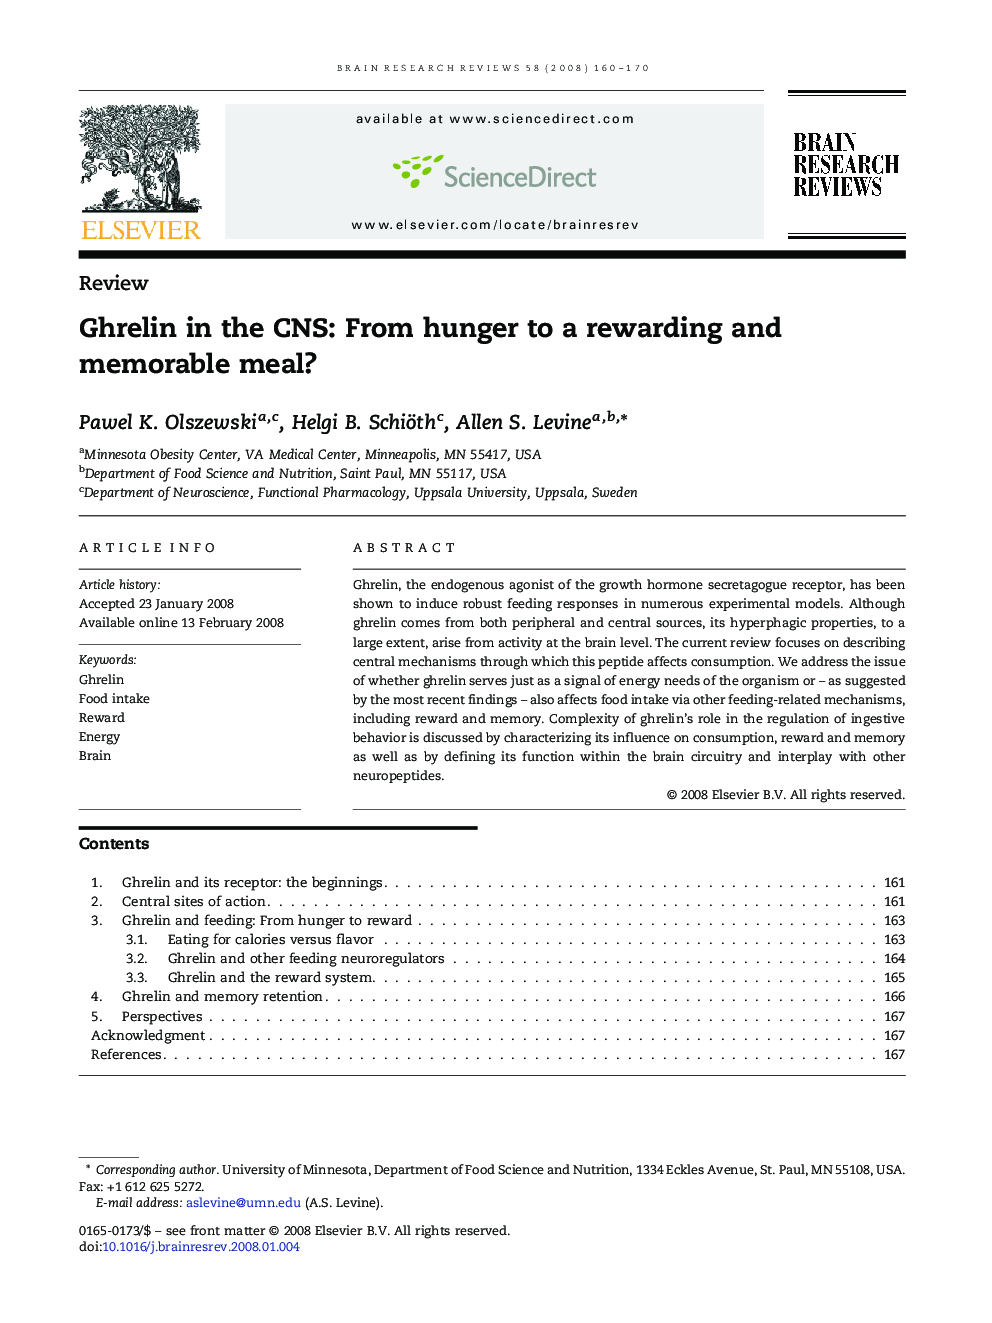 Ghrelin in the CNS: From hunger to a rewarding and memorable meal?